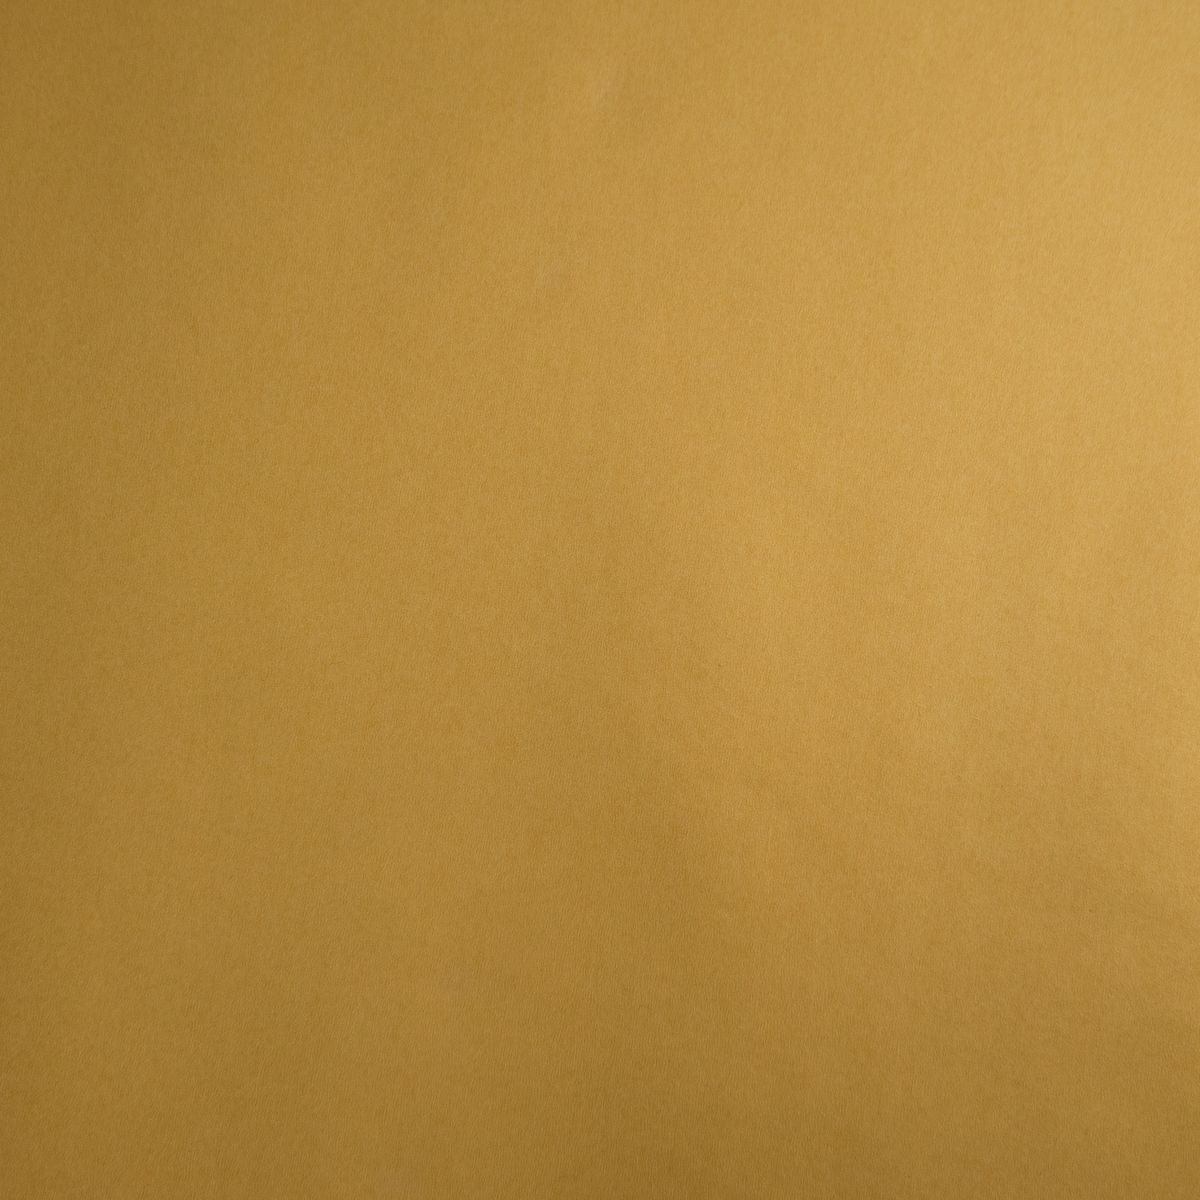 Gold Wrapping Paper - 10m roll | Shop Today. Get it Tomorrow ...